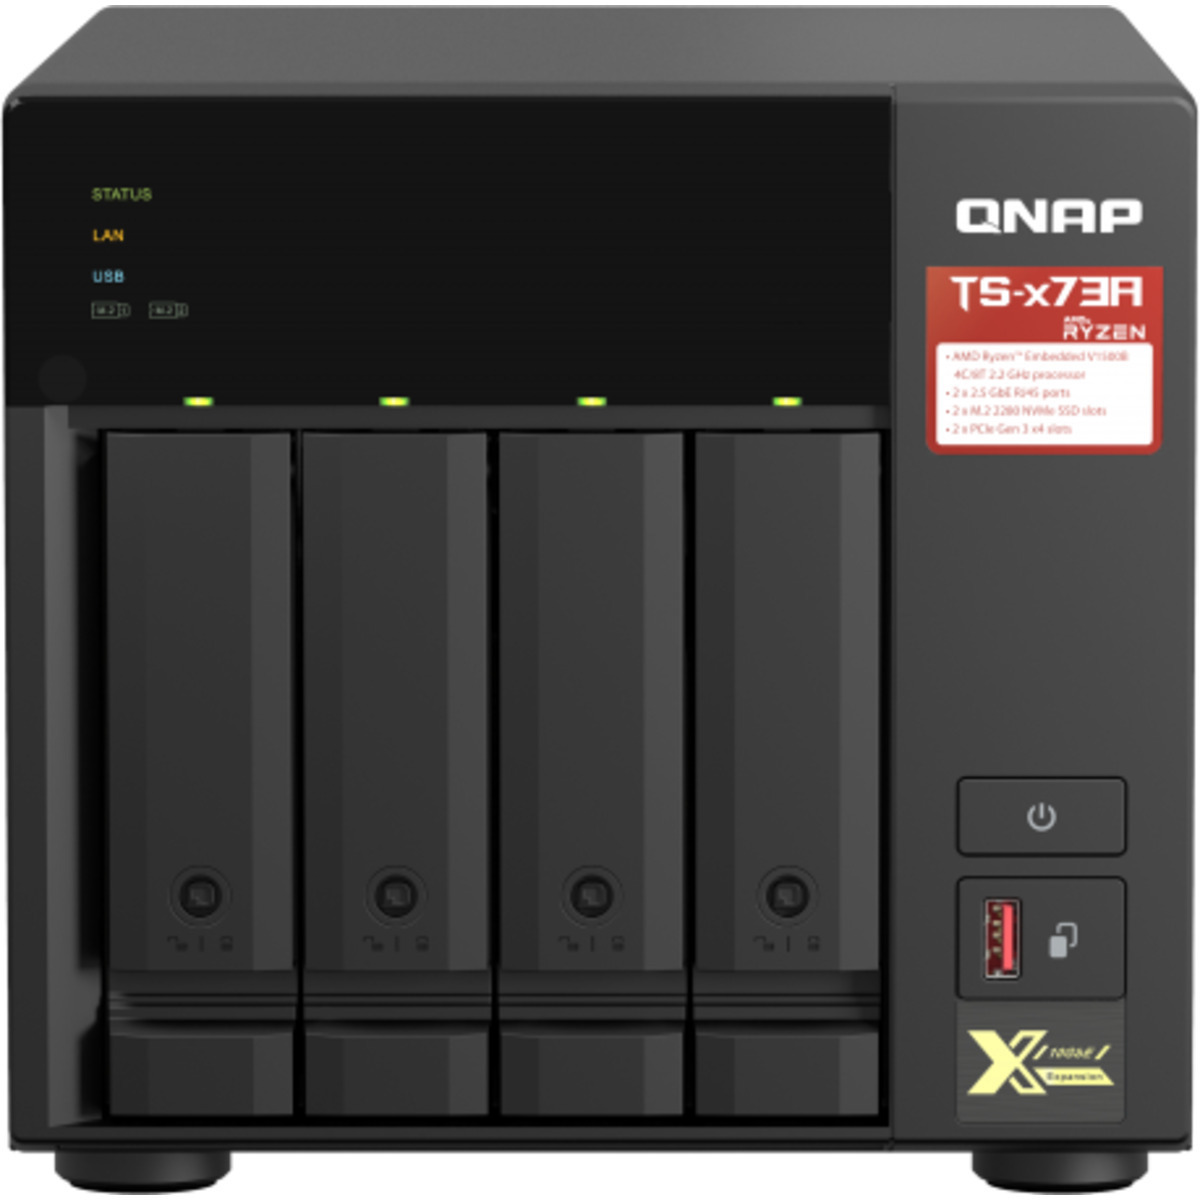 buy QNAP TS-473A 32tb Desktop NAS - Network Attached Storage Device 4x8000gb Samsung 870 QVO MZ-77Q8T0 2.5 560/530MB/s SATA 6Gb/s SSD CONSUMER Class Drives Installed - Burn-In Tested - nas headquarters buy network attached storage server device das new raid-5 free shipping simply usa christmas holiday black friday cyber monday week sale happening now! TS-473A